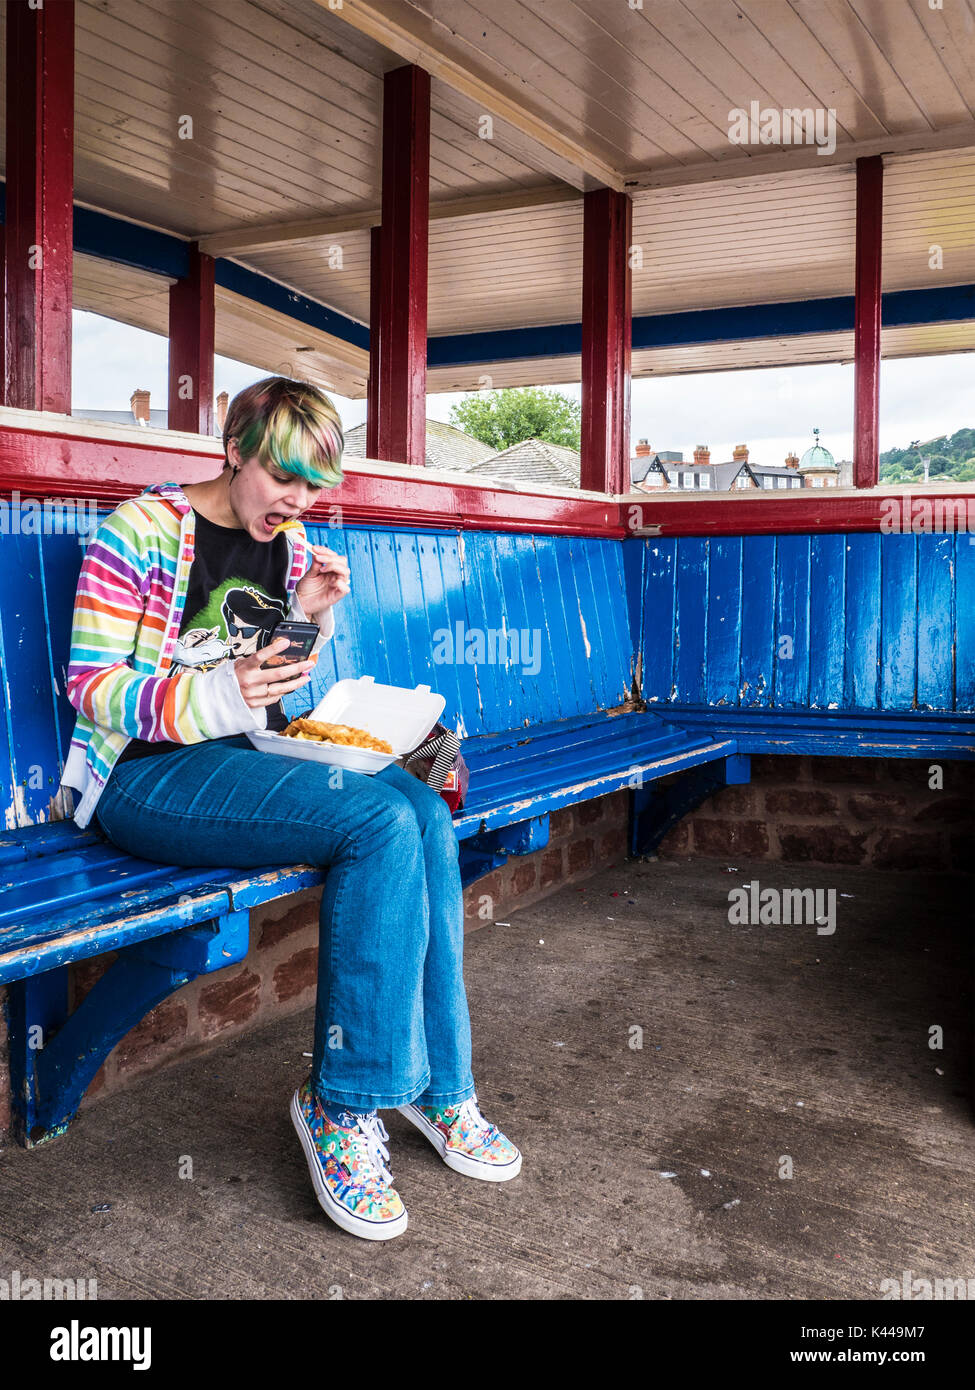 A young girl eats fish and chips in a shelter on the promenade at Minehead in Somerset. Stock Photo